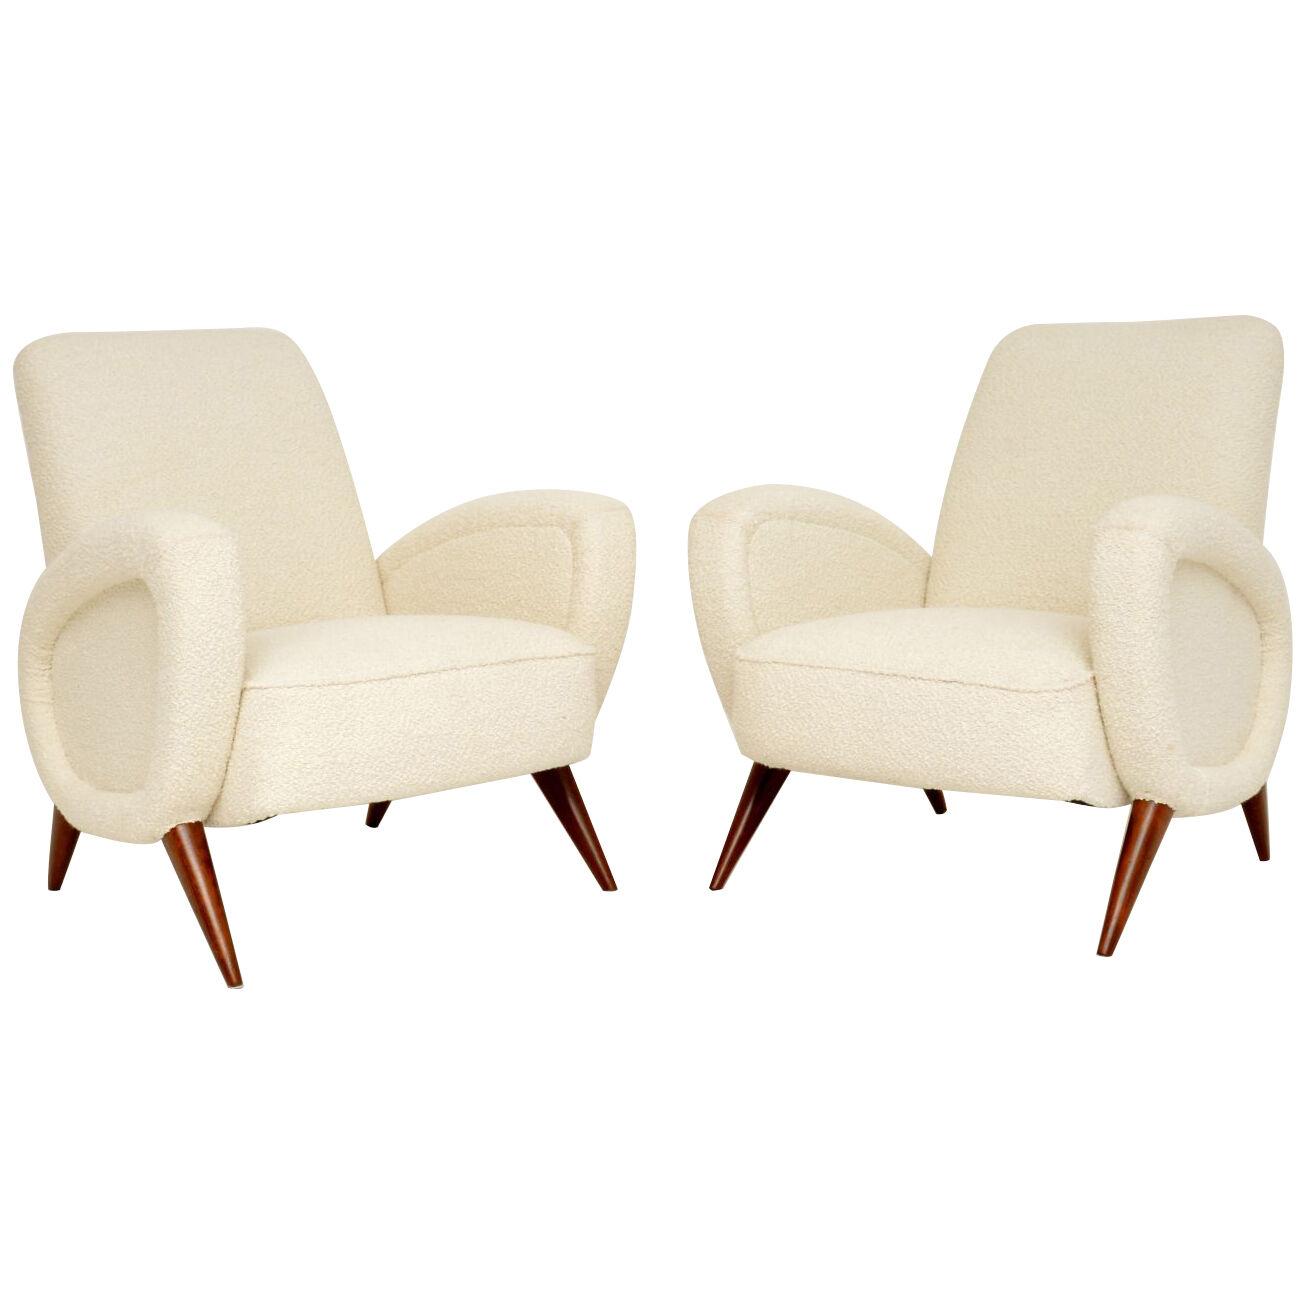 1960's Pair of Italian Vintage Armchairs Attributed to Marco Zanuso